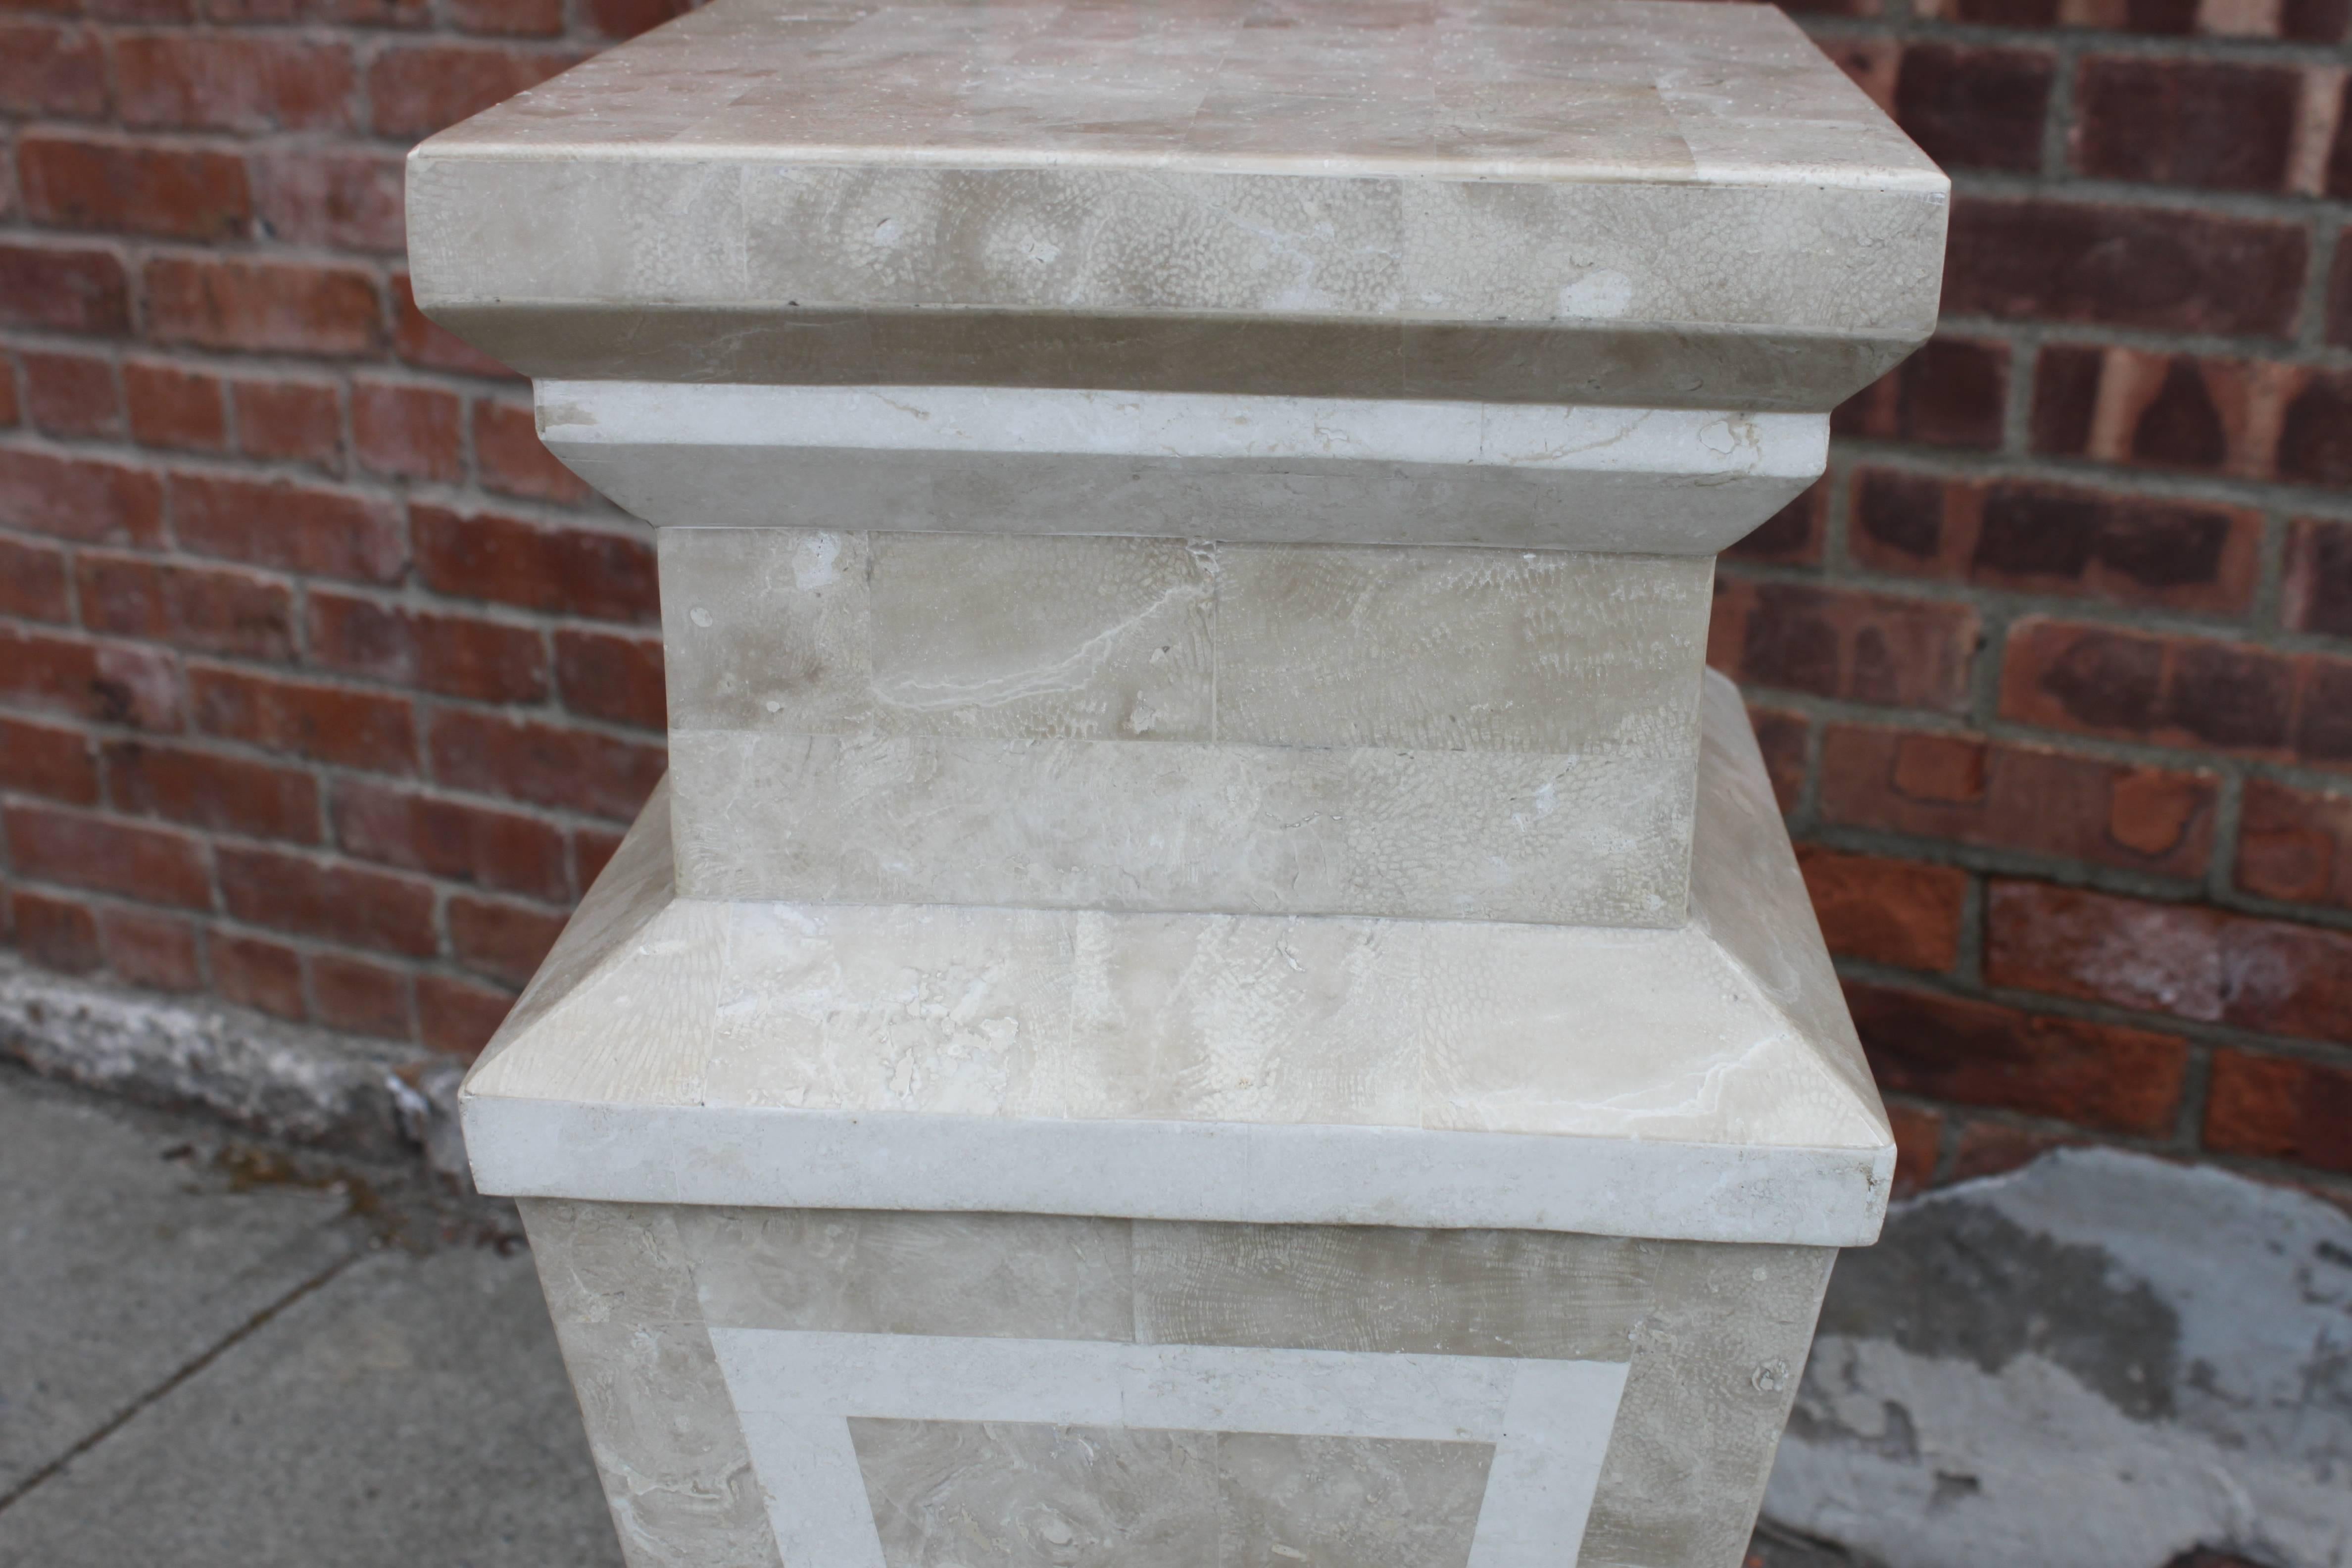 Tessellated stone pedestal, circa 1980s. Slight surface damage on one lower corner but hardly noticeable, please see pictures. Overall in very good shape. Top of pedestal is 12